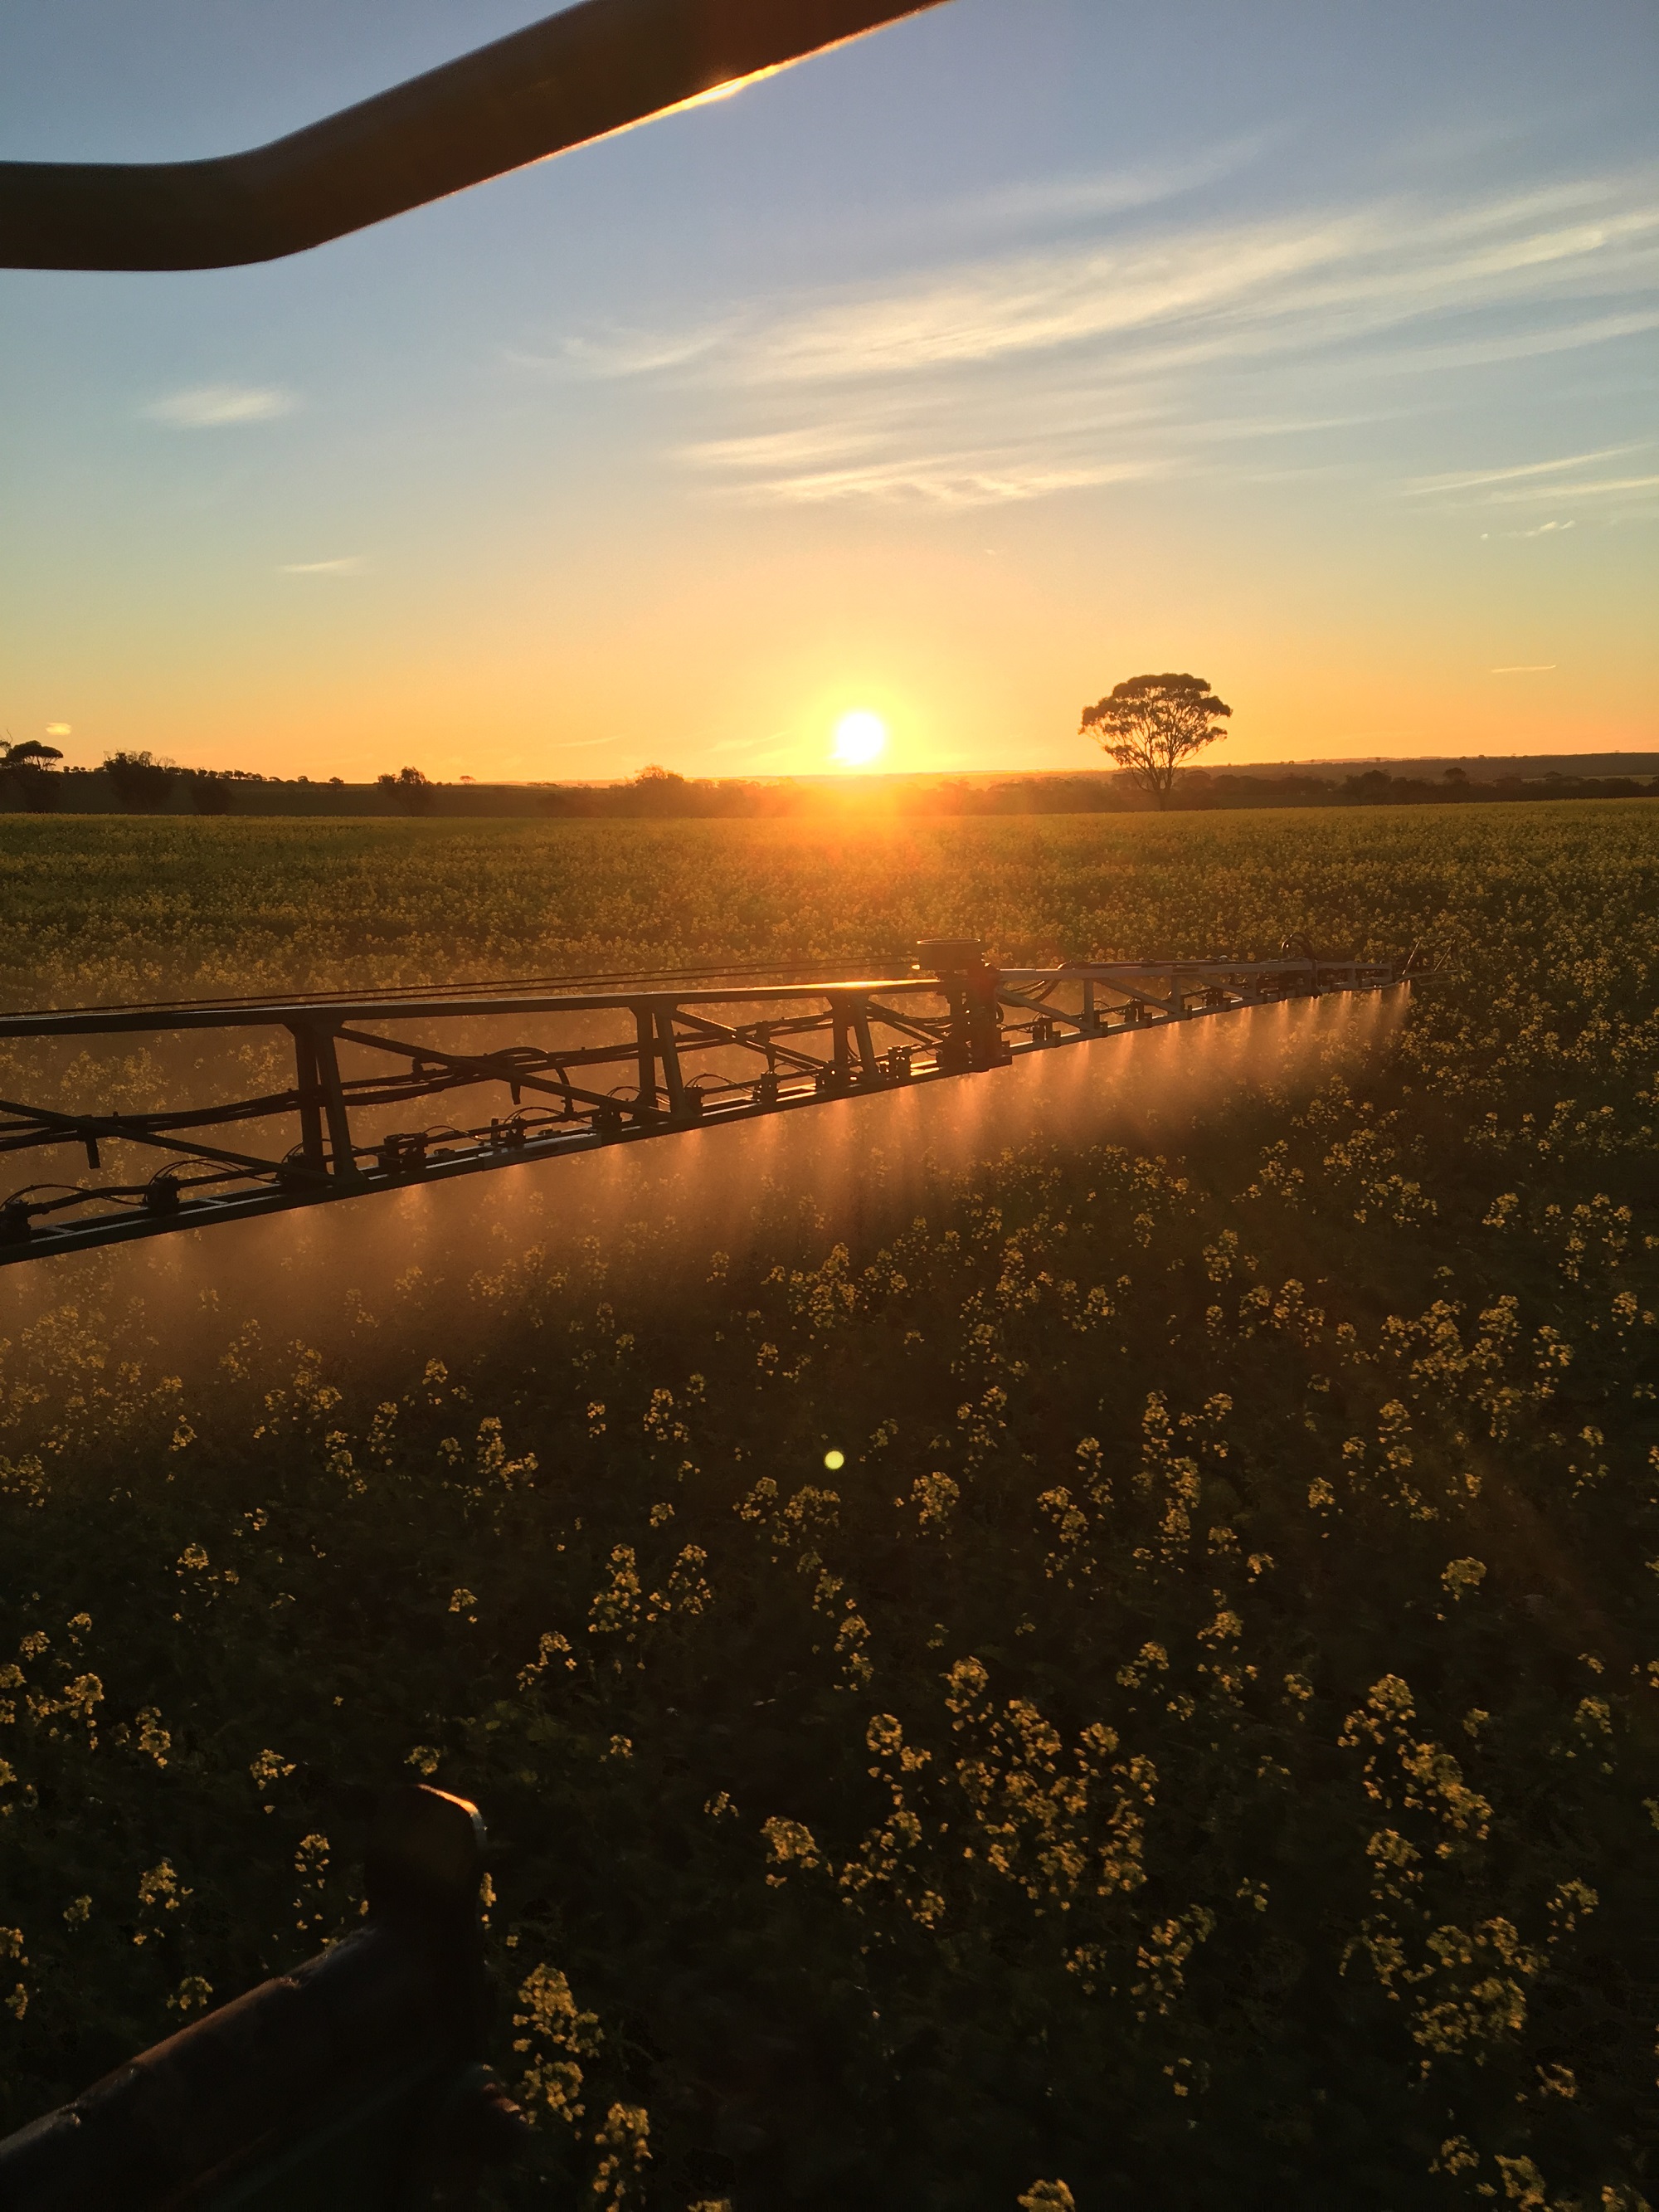 A tractor sprays chemicals or fertiliser as the sun rises